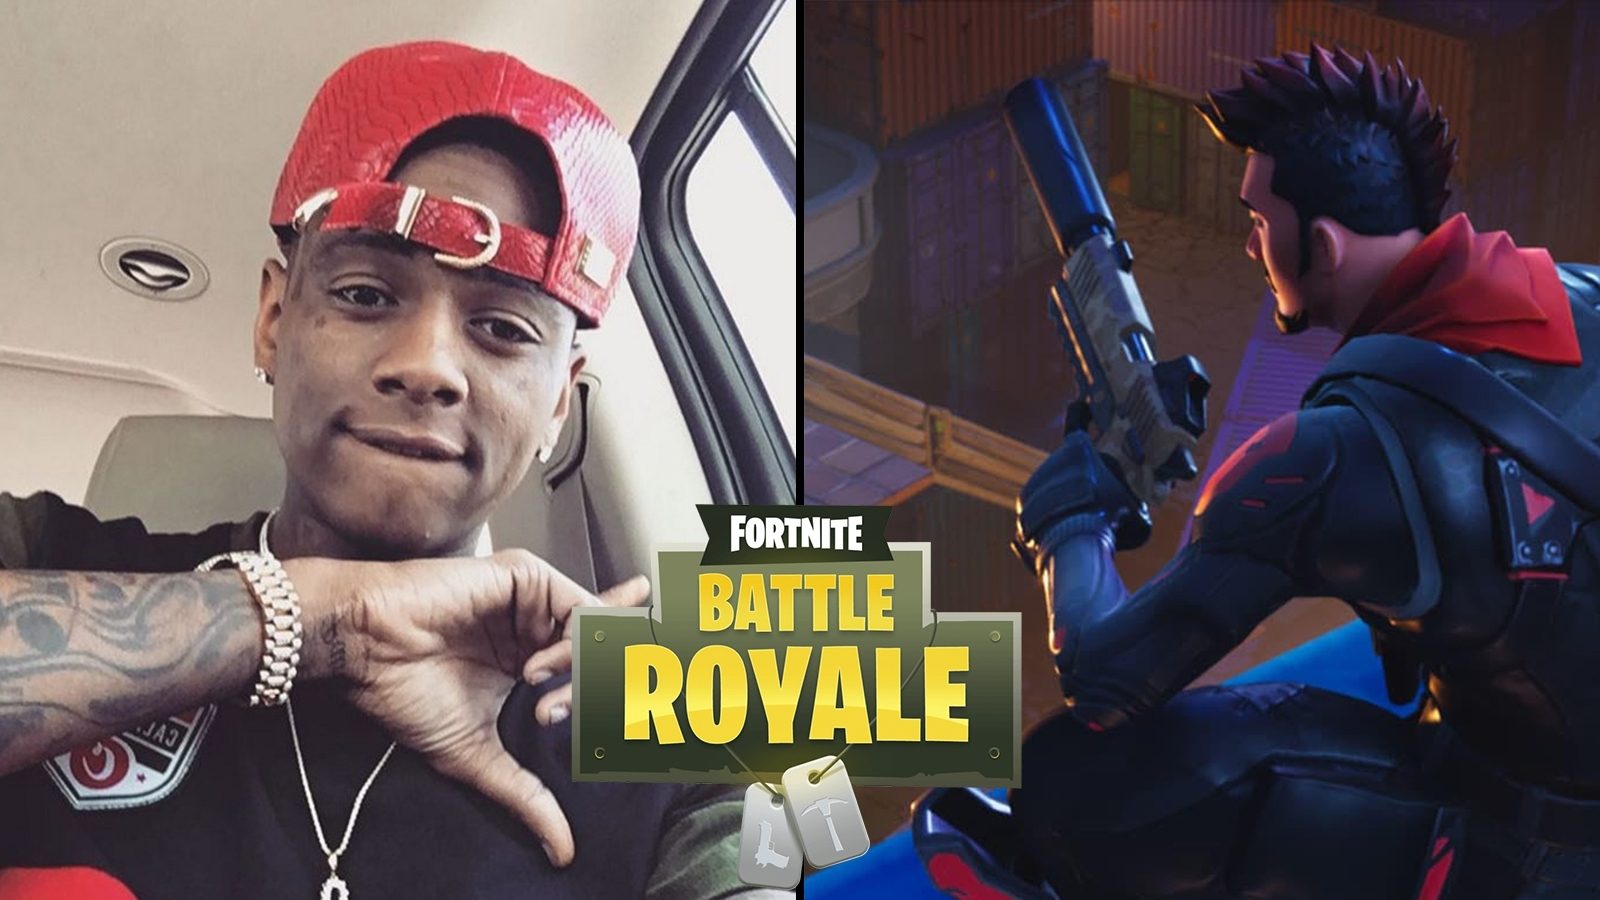 Players in Fortnite may soon be able to perform Soulja Boy’s signature “Crank That” dance.